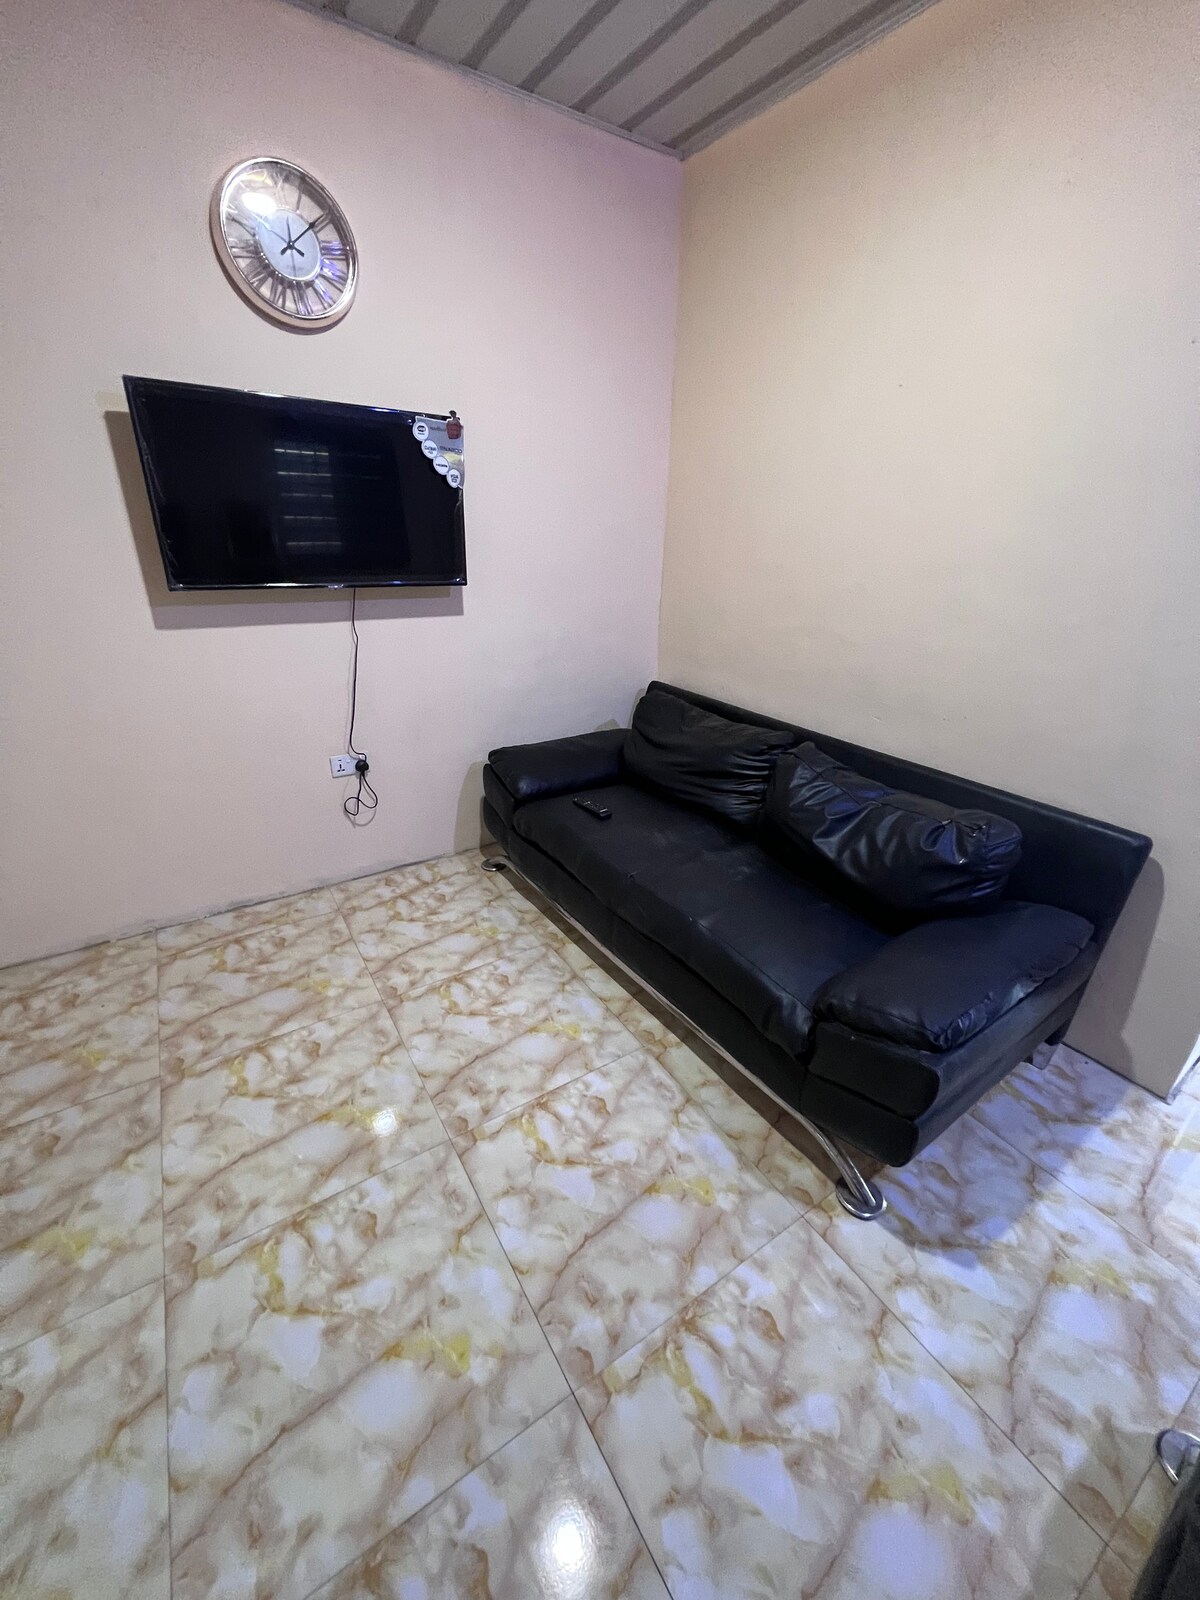 Lovely 1-bedroom rental
unit with BBQ grill